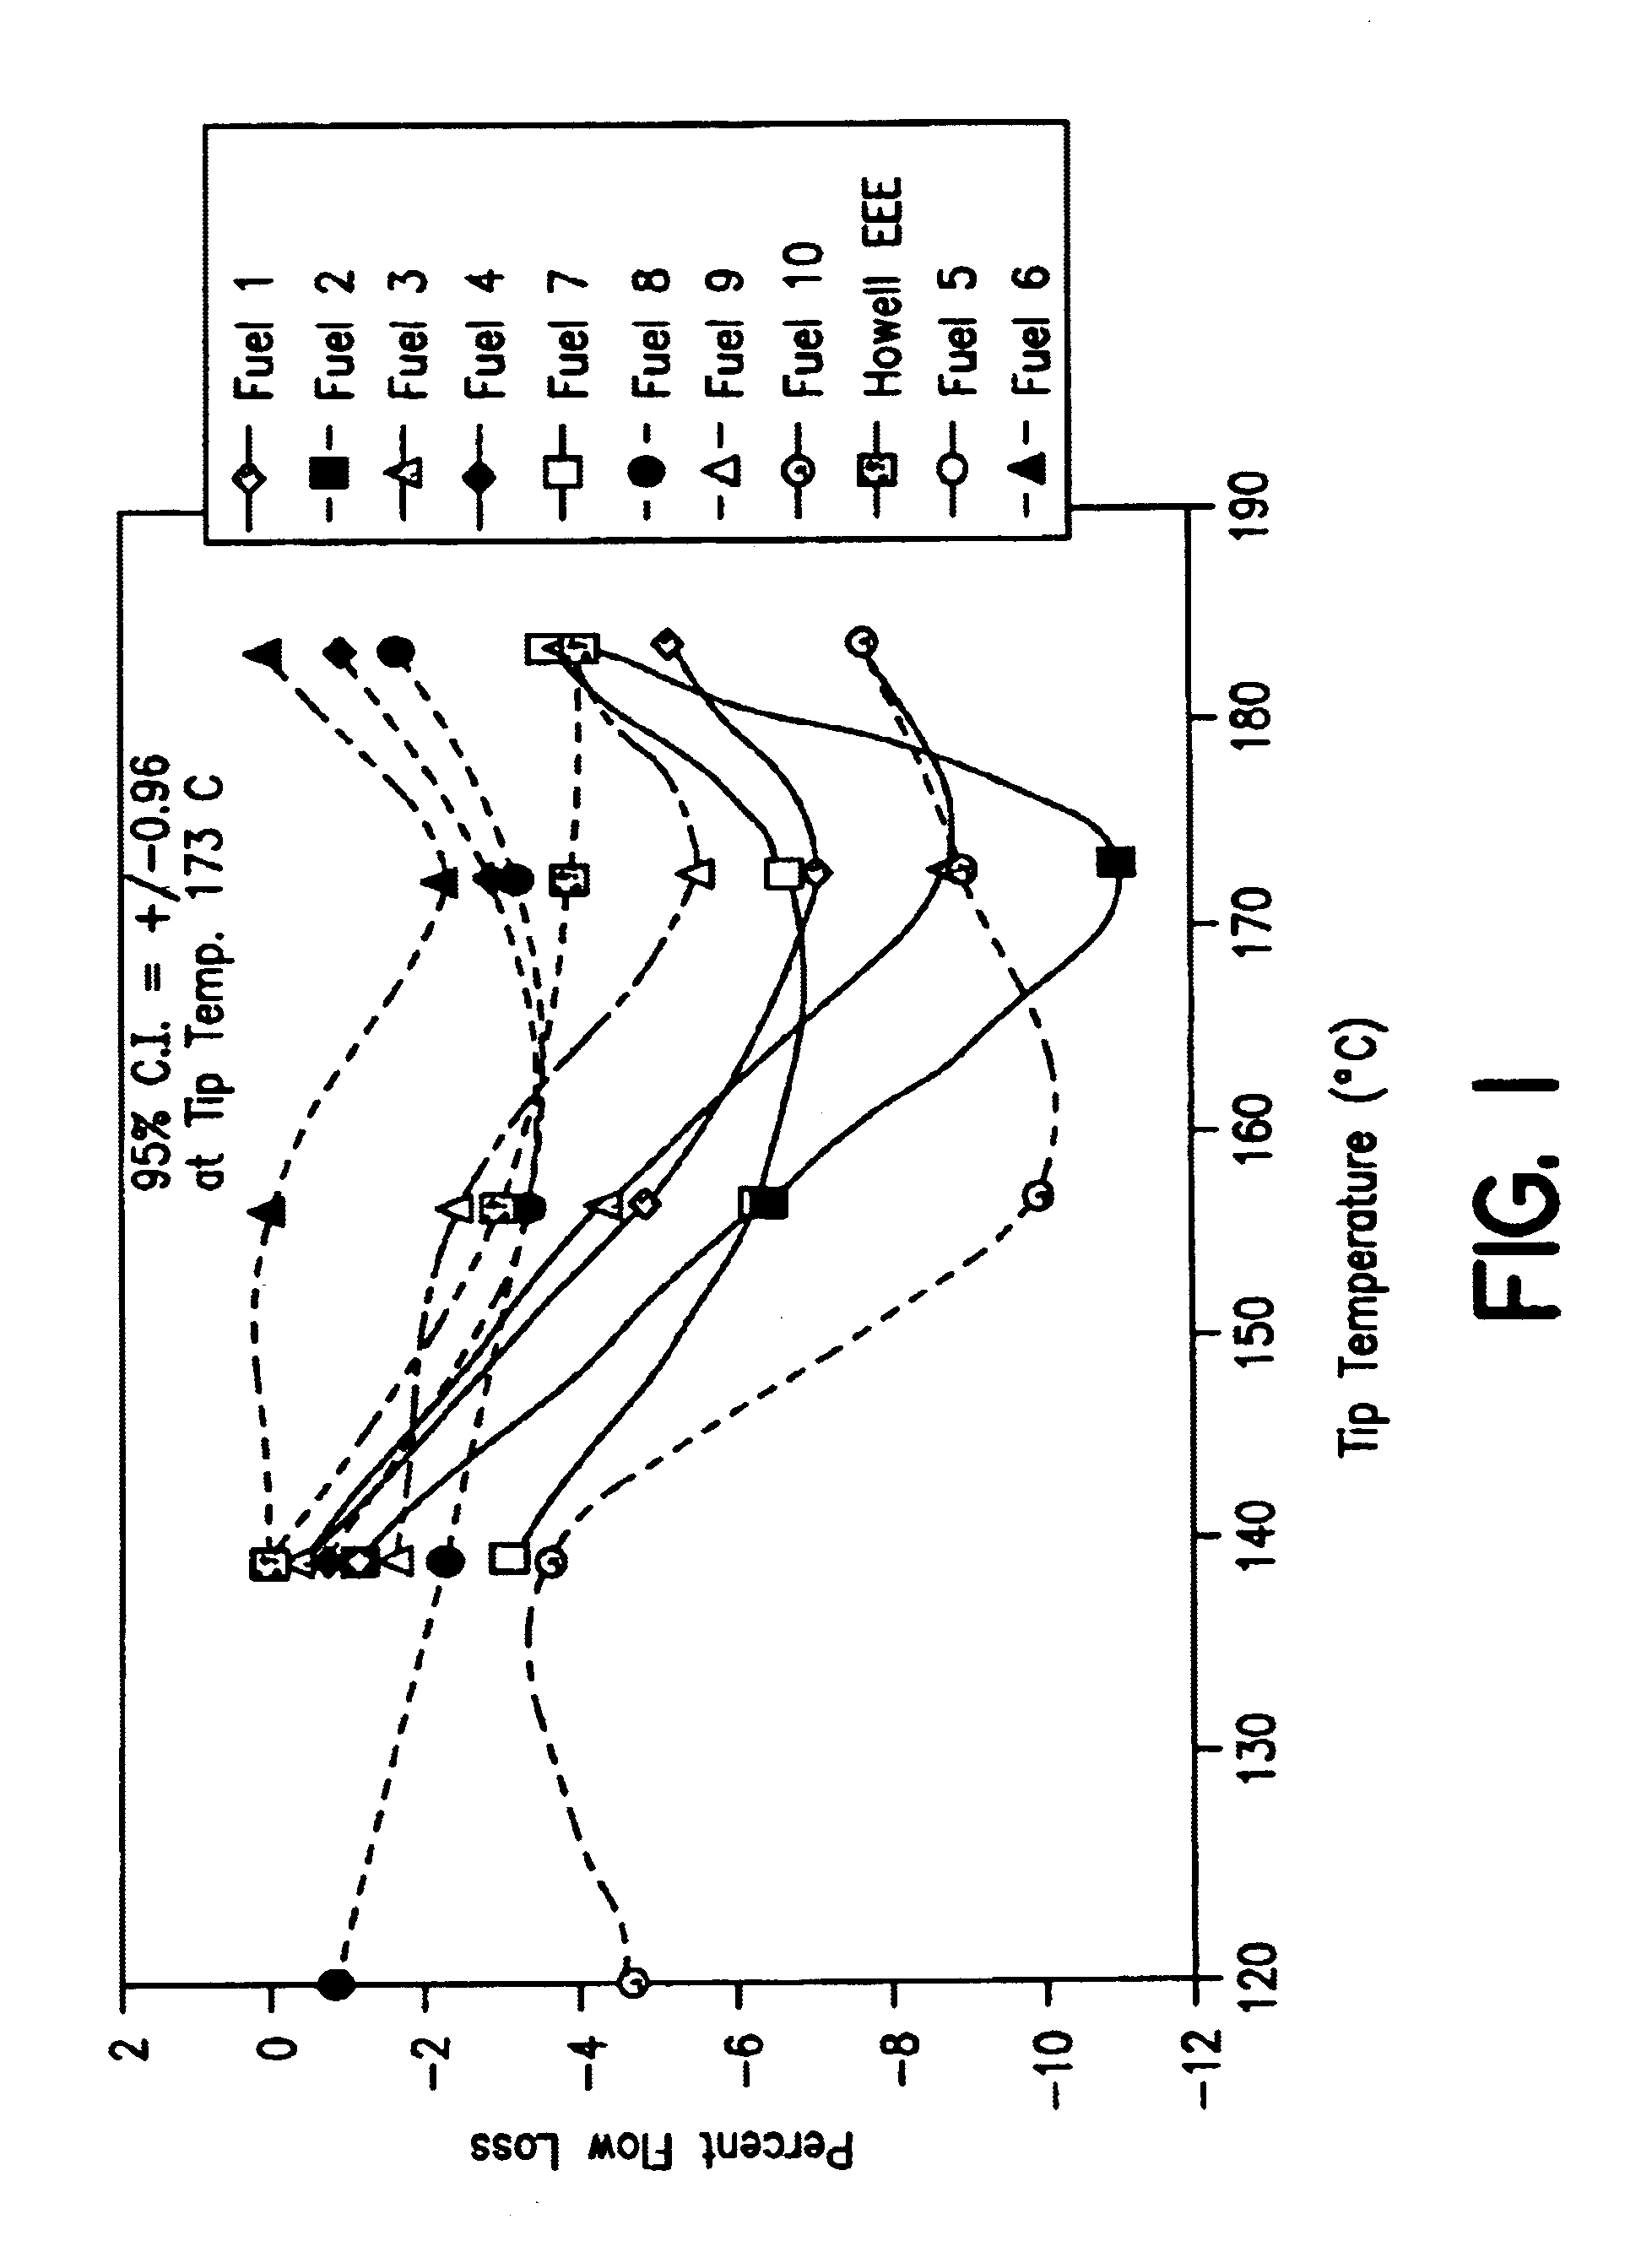 Method for controlling deposit formation in gasoline direct injection engine by use of a fuel having particular compositional characteristics